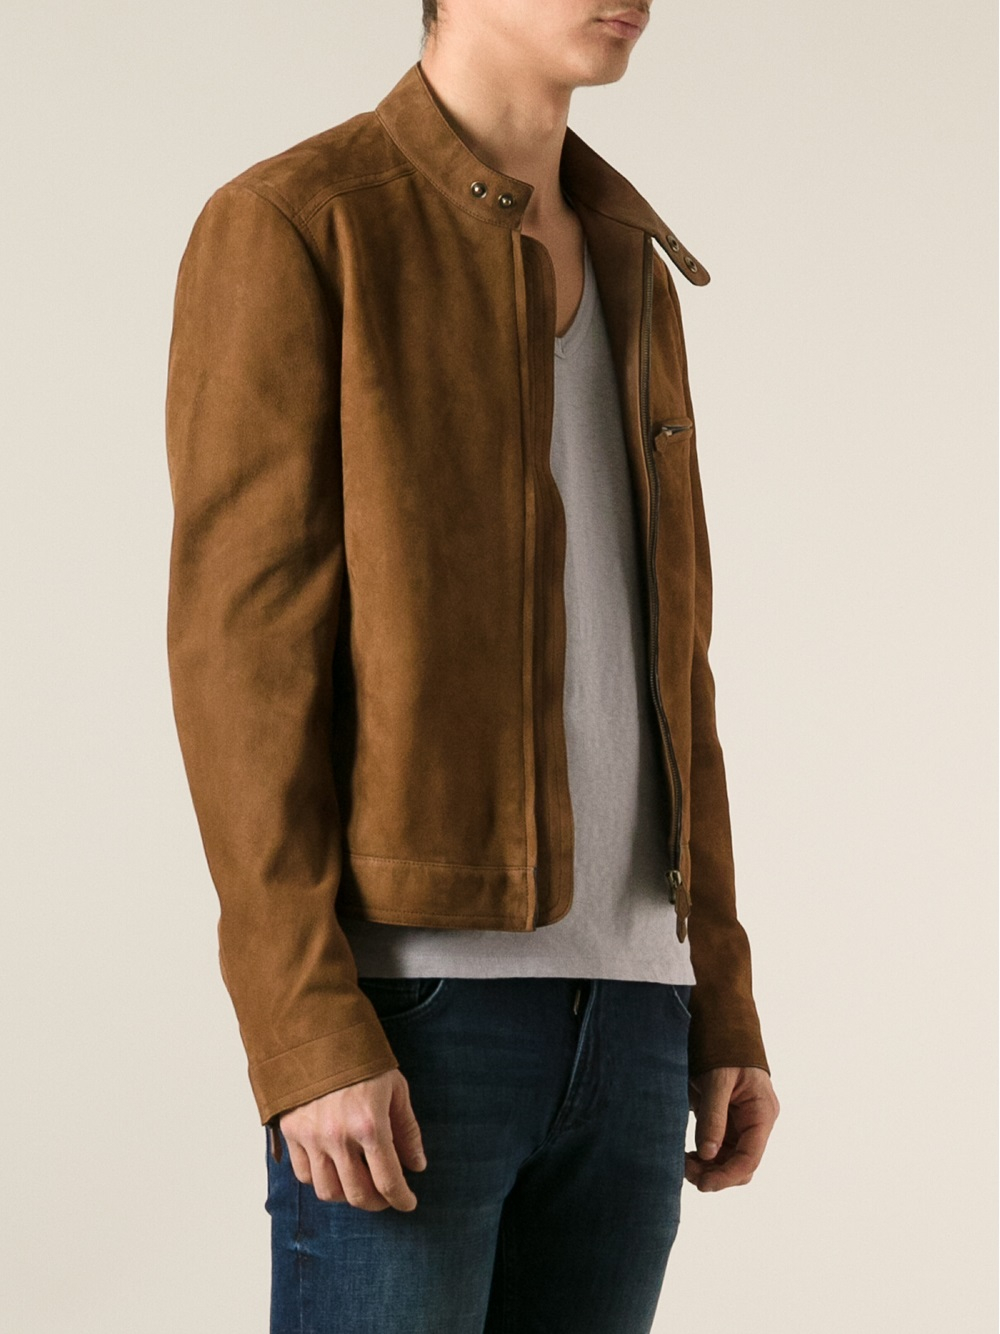 [Image: tom-ford-brown-leather-jacket-product-1-...ormal.jpeg]